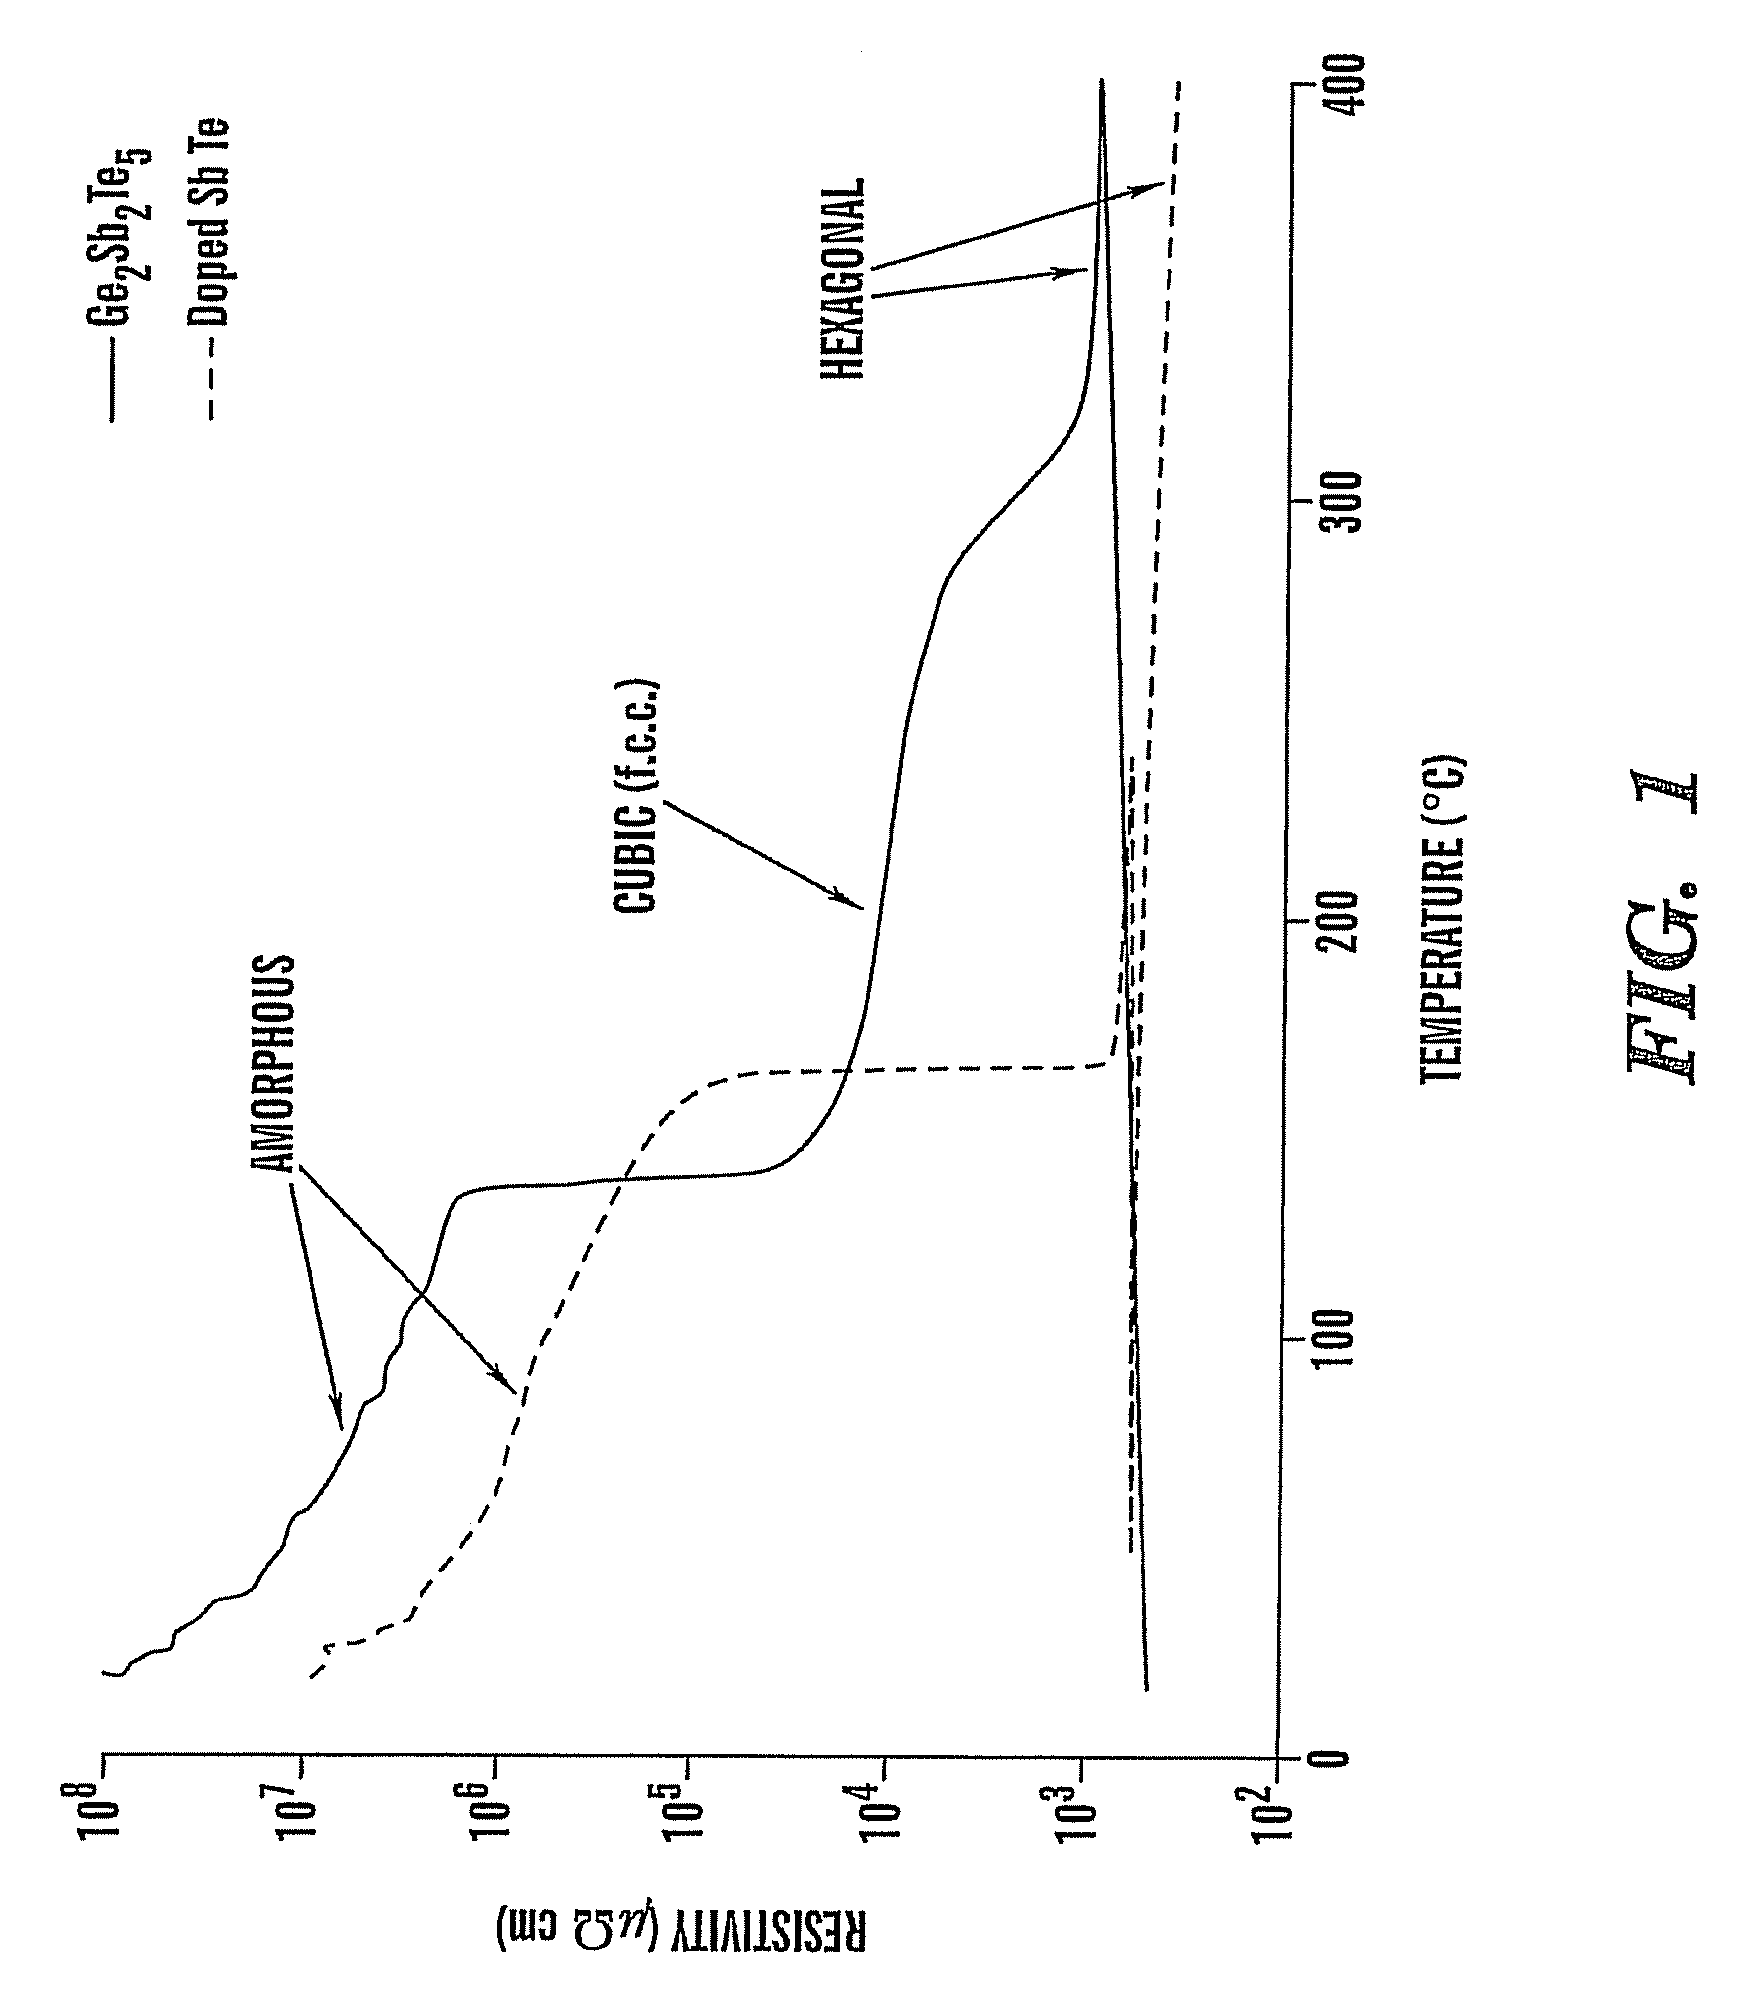 Heat-shielded low power PCM-based reprogrammable EFUSE device